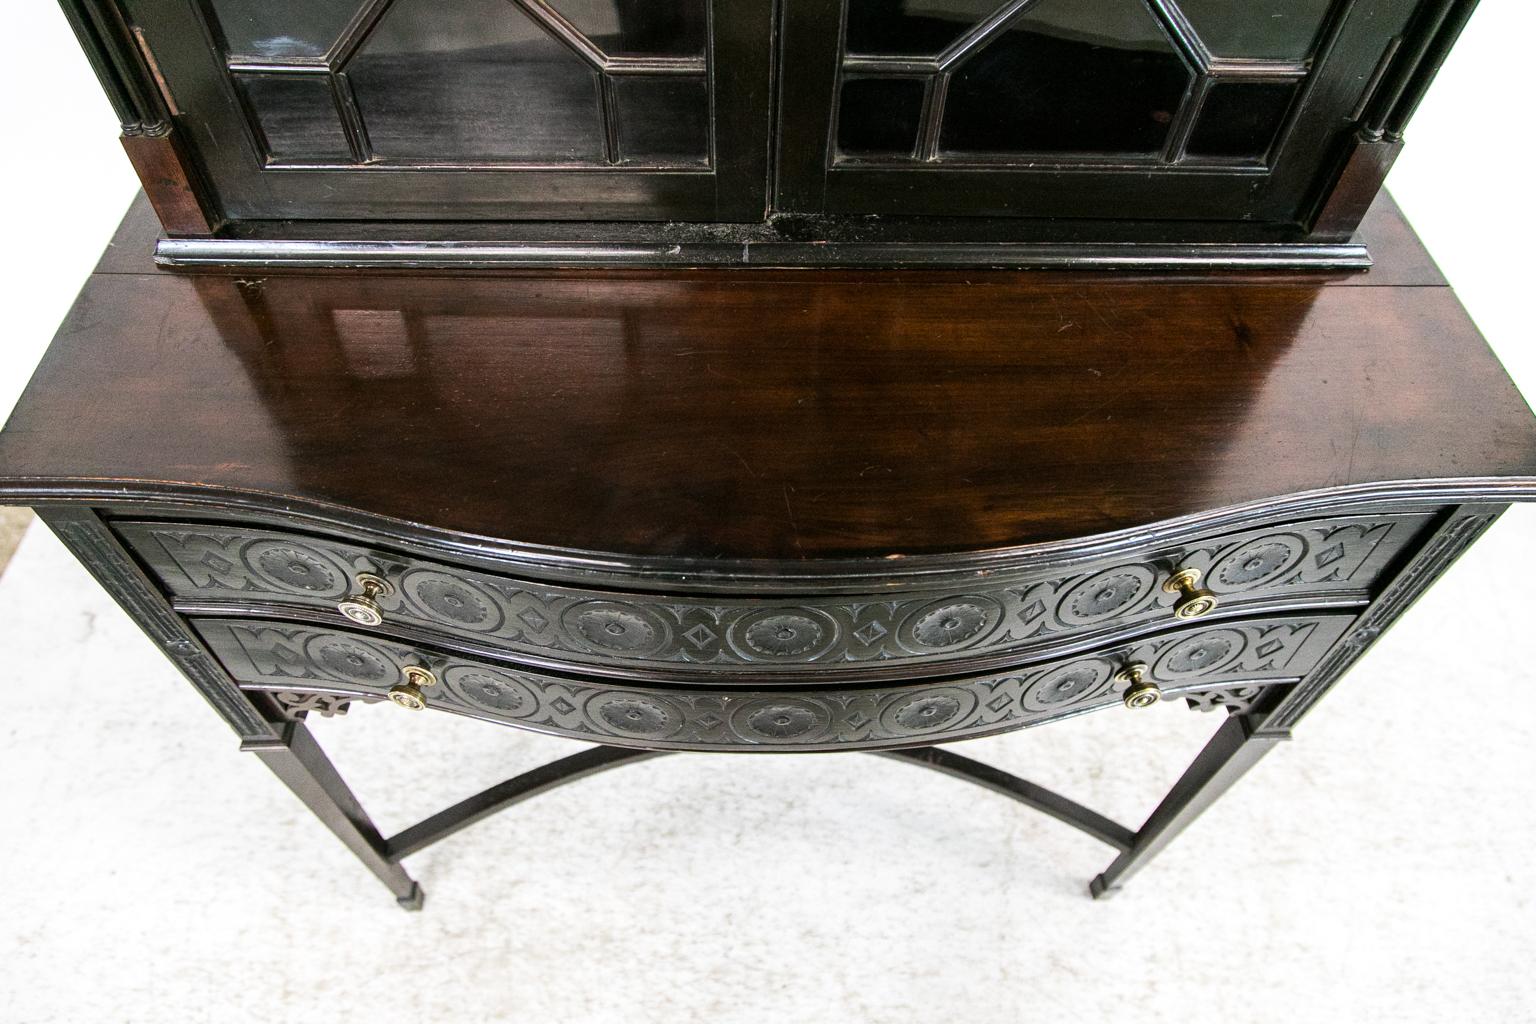 The top half of this display cabinet/bookcase has a broken arch pediment with open fretwork carving. The frieze is carved with repeating arches and the stiles have two double free standing small columns. The lower section has a serpentine shape and